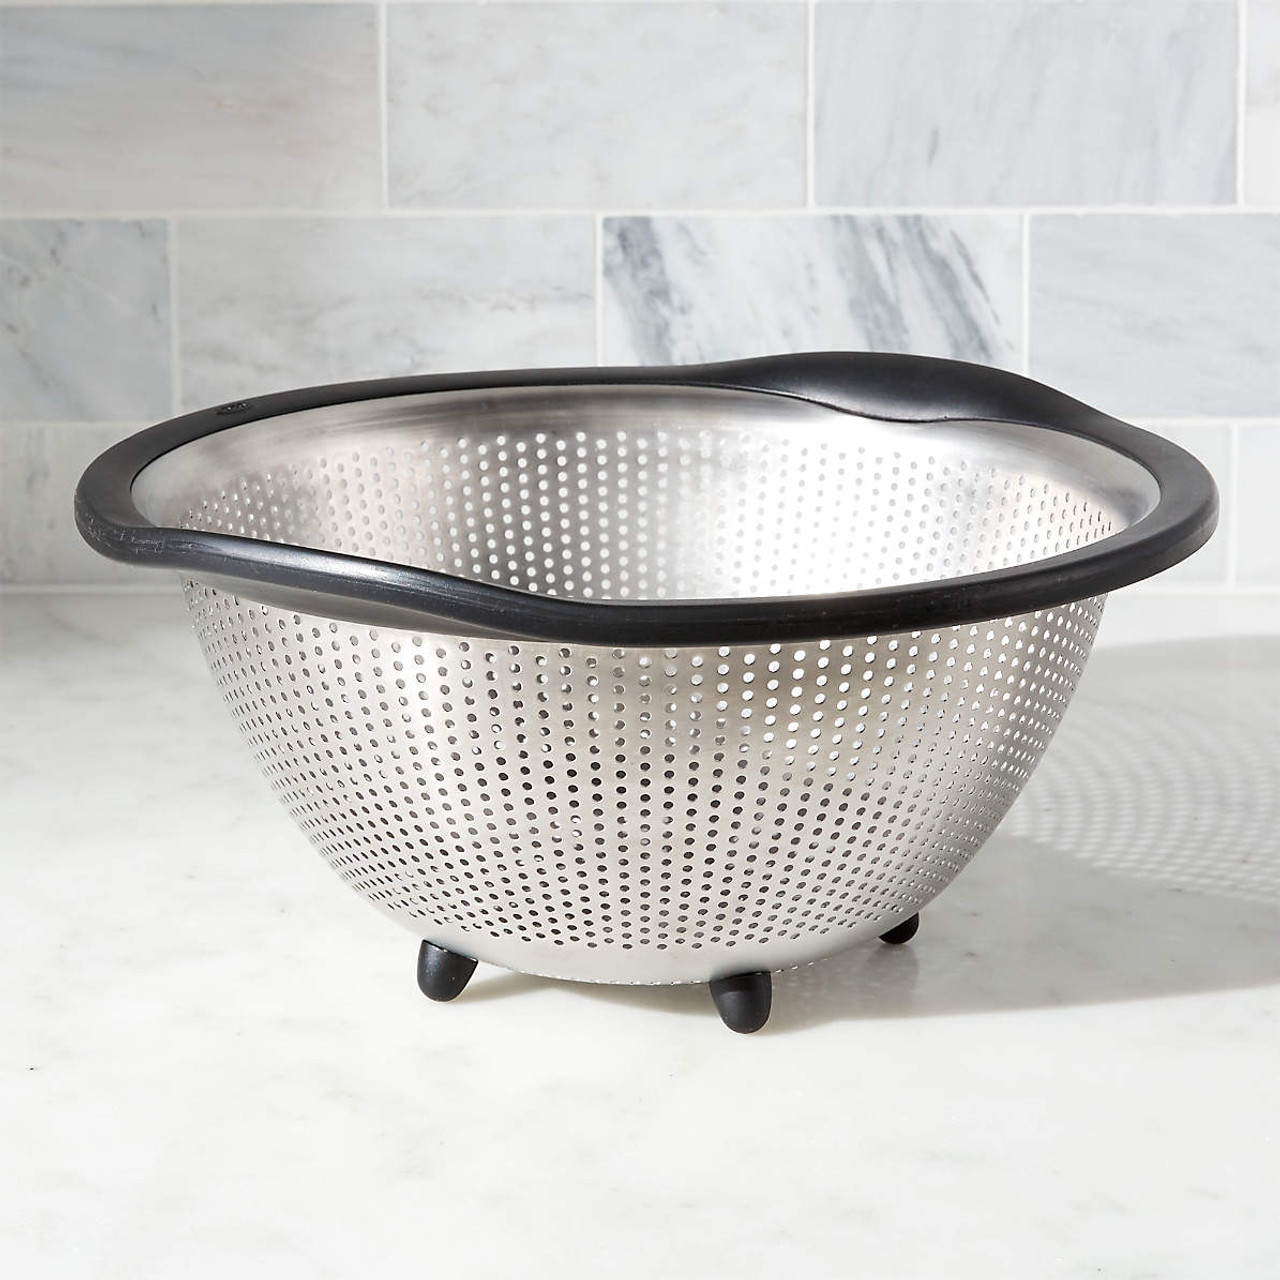 https://cdn11.bigcommerce.com/s-e0xlh4avpe/images/stencil/1280x1280/products/119221/160504/oxo-stainless-steel-5-qt.-colander__64480.1663861445.jpg?c=1